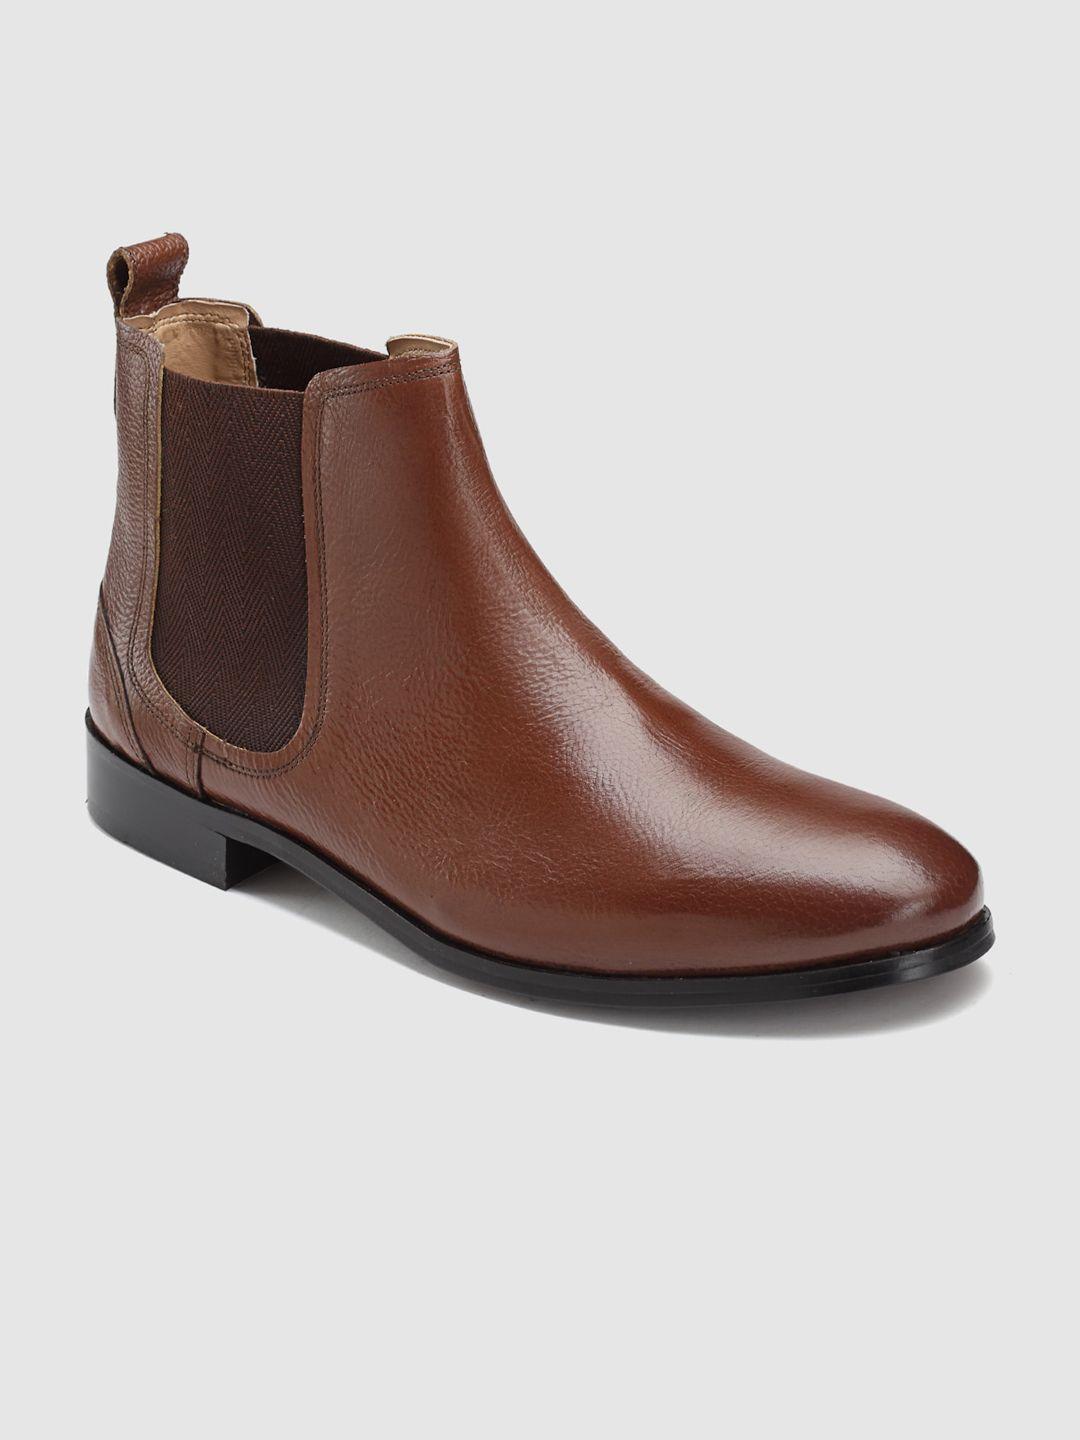 hats off accessories men mid top leather chelsea boots